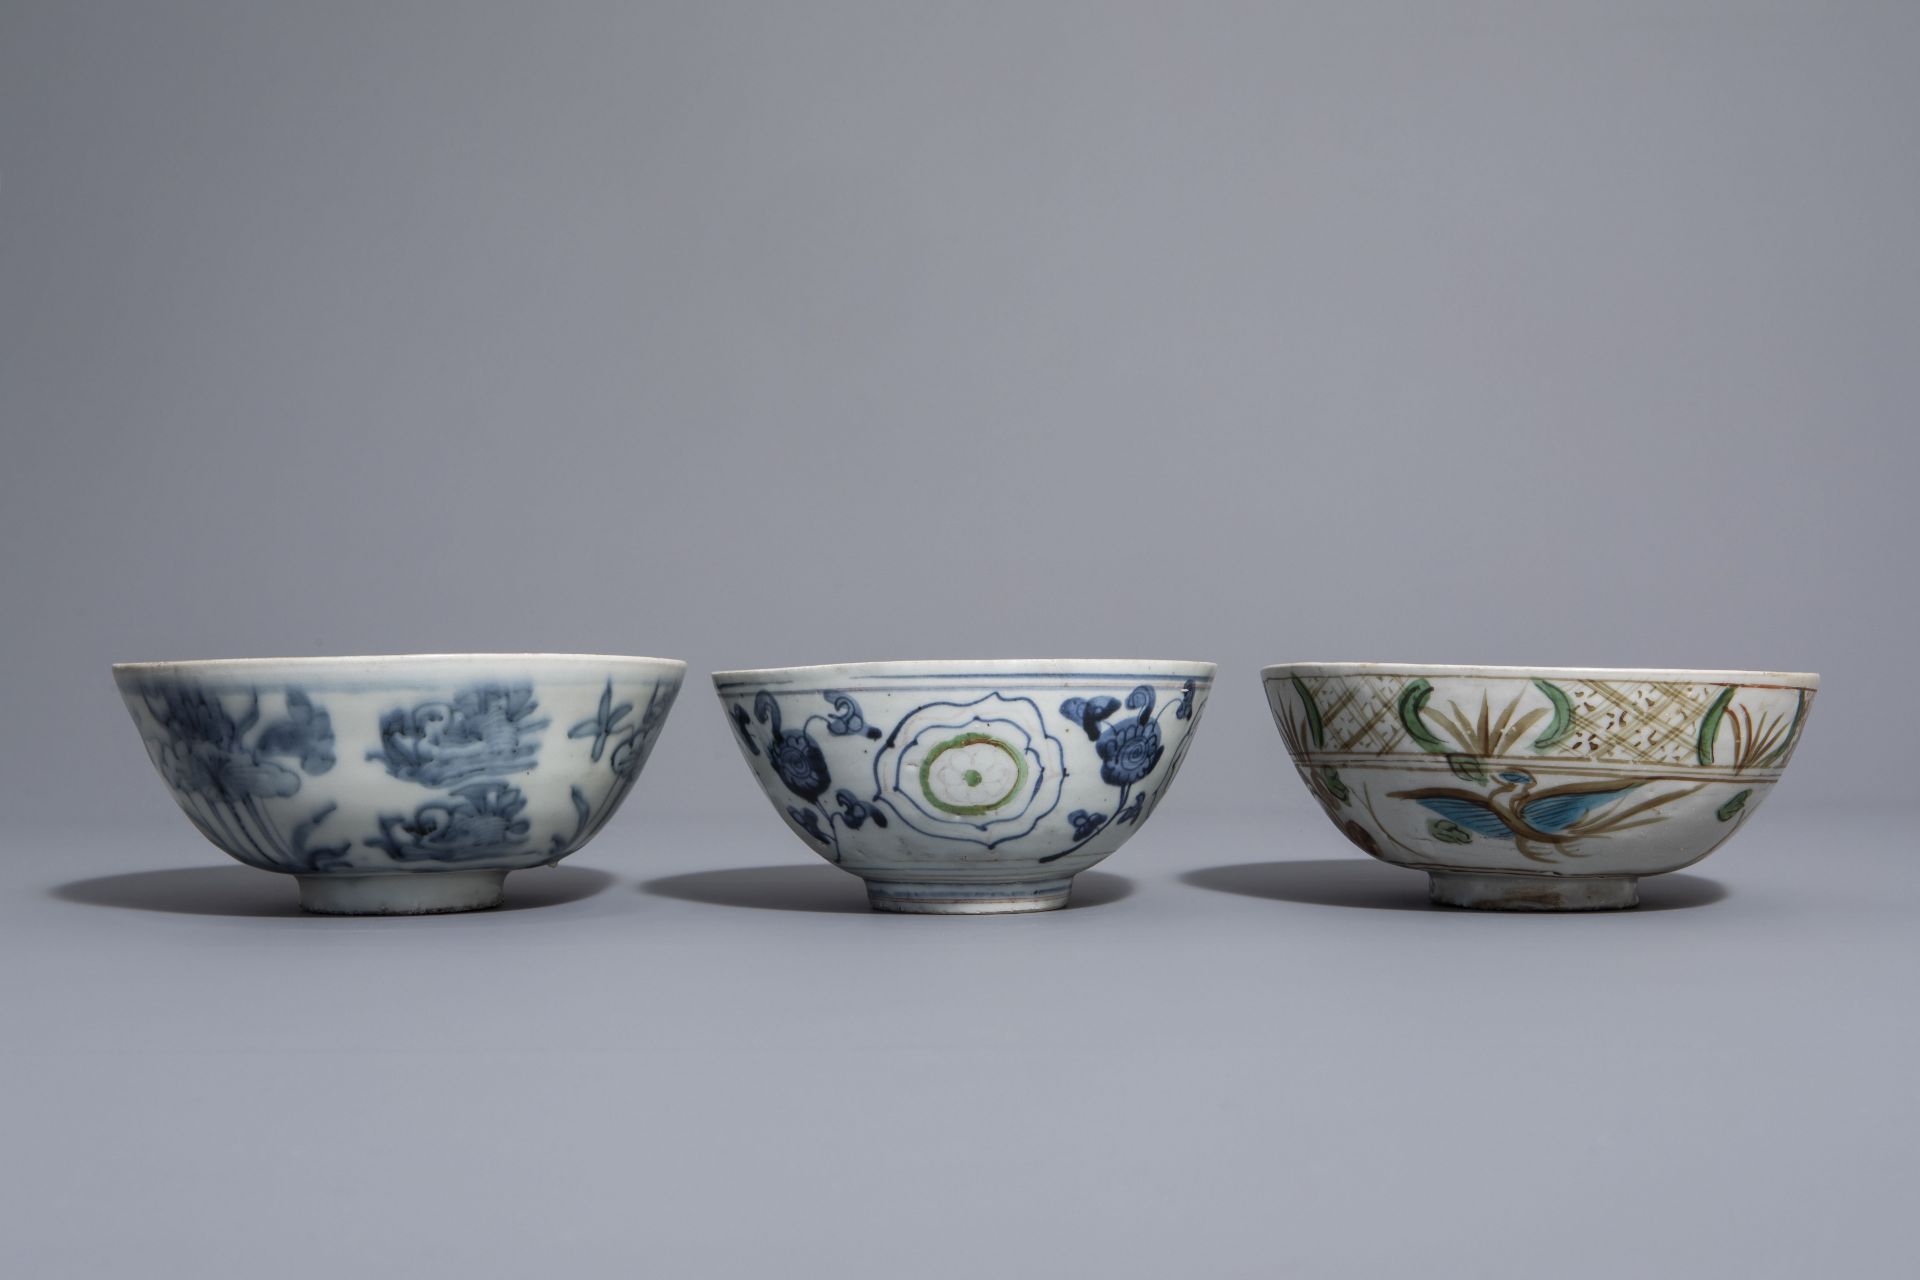 Three Chinese blue, white and polychrome Swatow bowls with different designs, 17th C. - Image 4 of 7